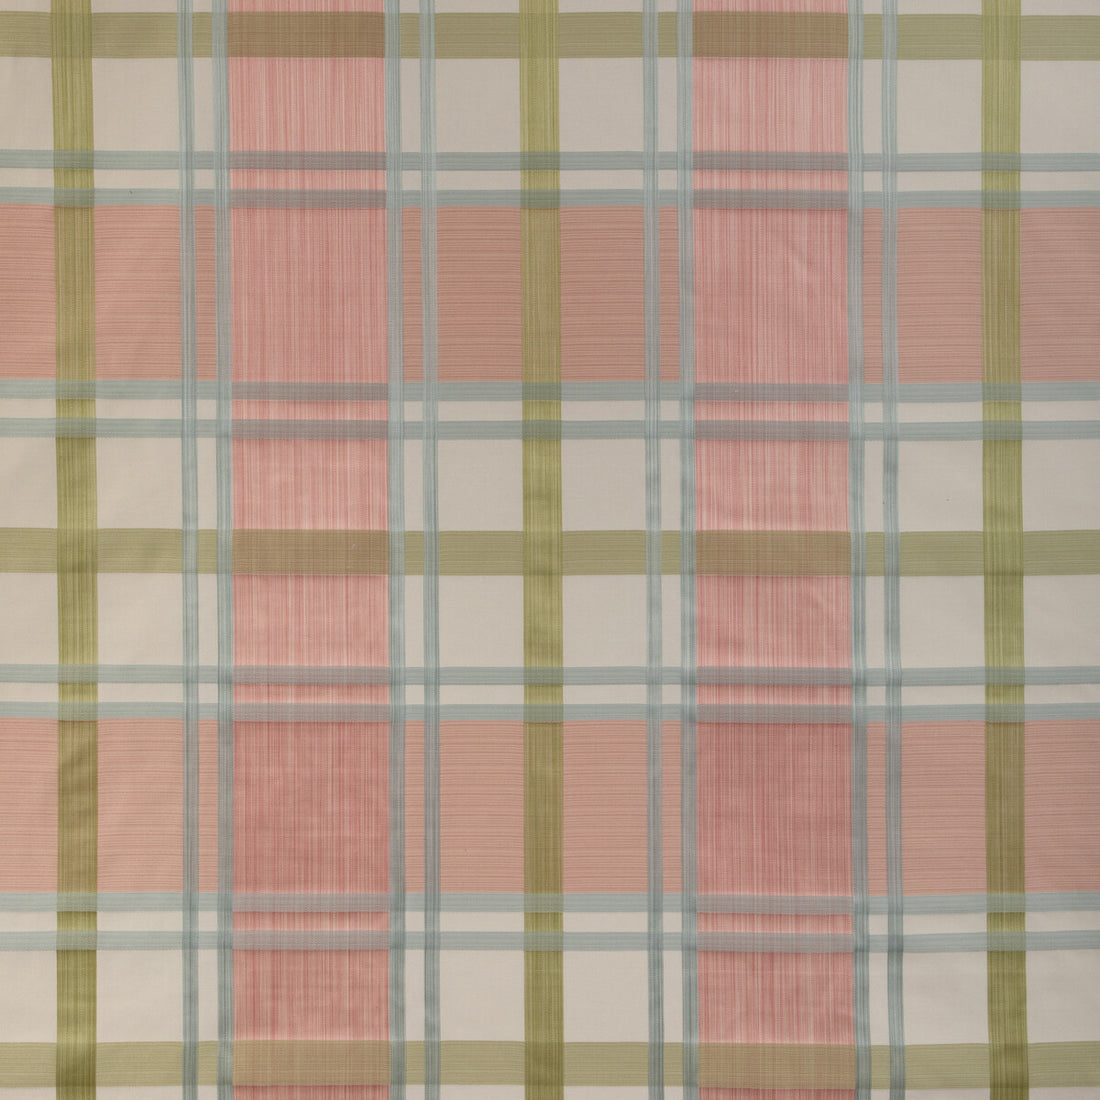 Davies Plaid fabric in petal/kiwi color - pattern 2023109.73.0 - by Lee Jofa in the Highfield Stripes And Plaids collection